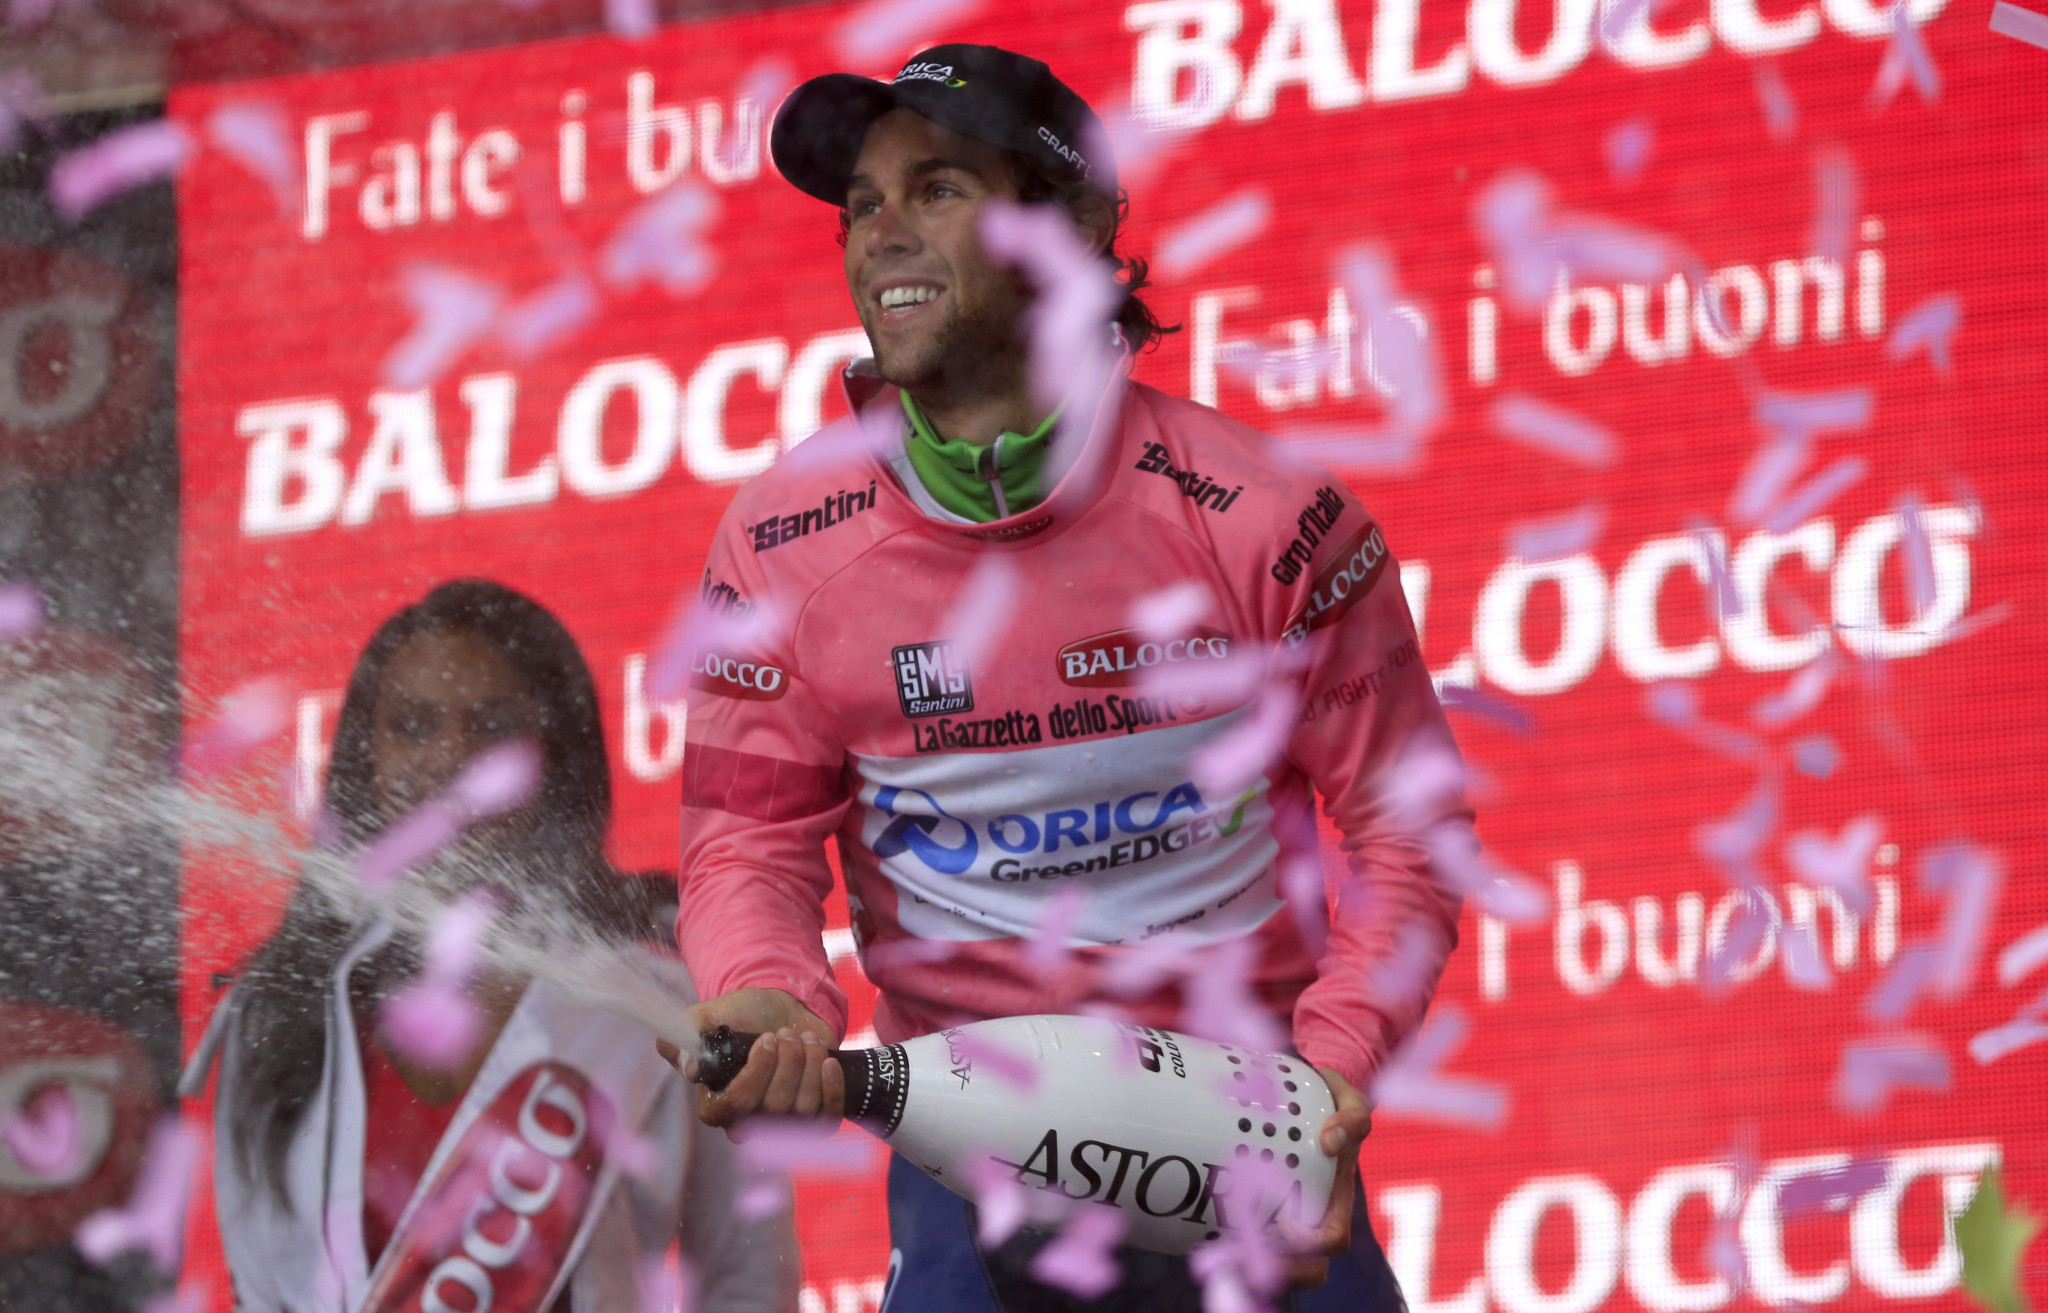 The Giro d'Italia succeeded in holding its start in 2014 in Ireland, but faces a more controversial opening in Israel this year ©Getty Images